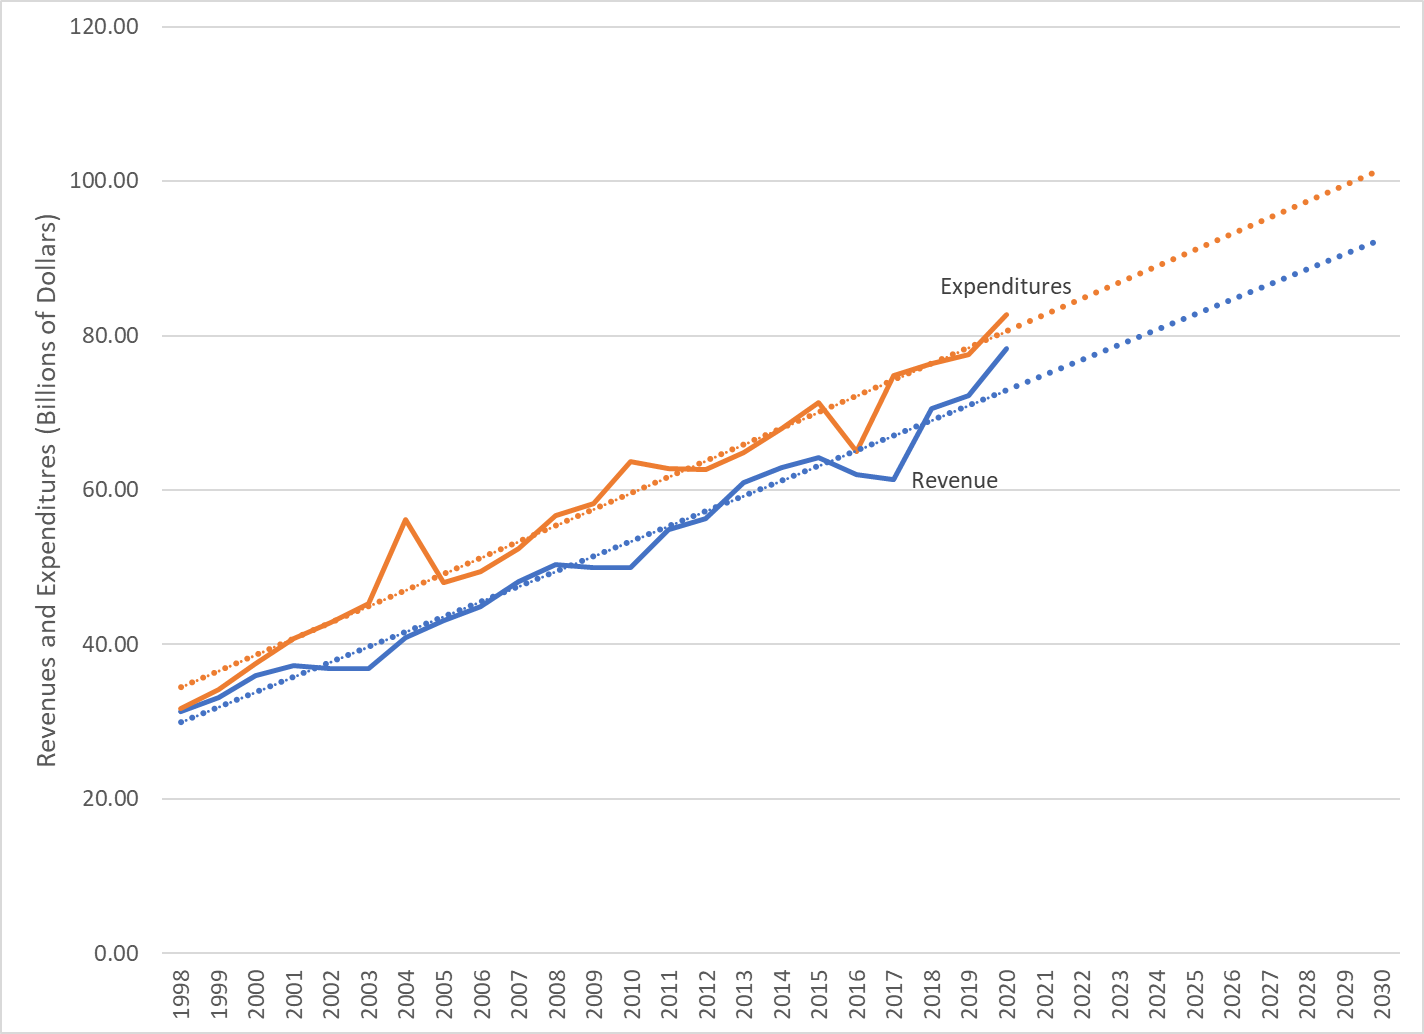 Figure 2. Revenues & Expenditures, State of Illinois, 1998-2020 with Projections to 2030